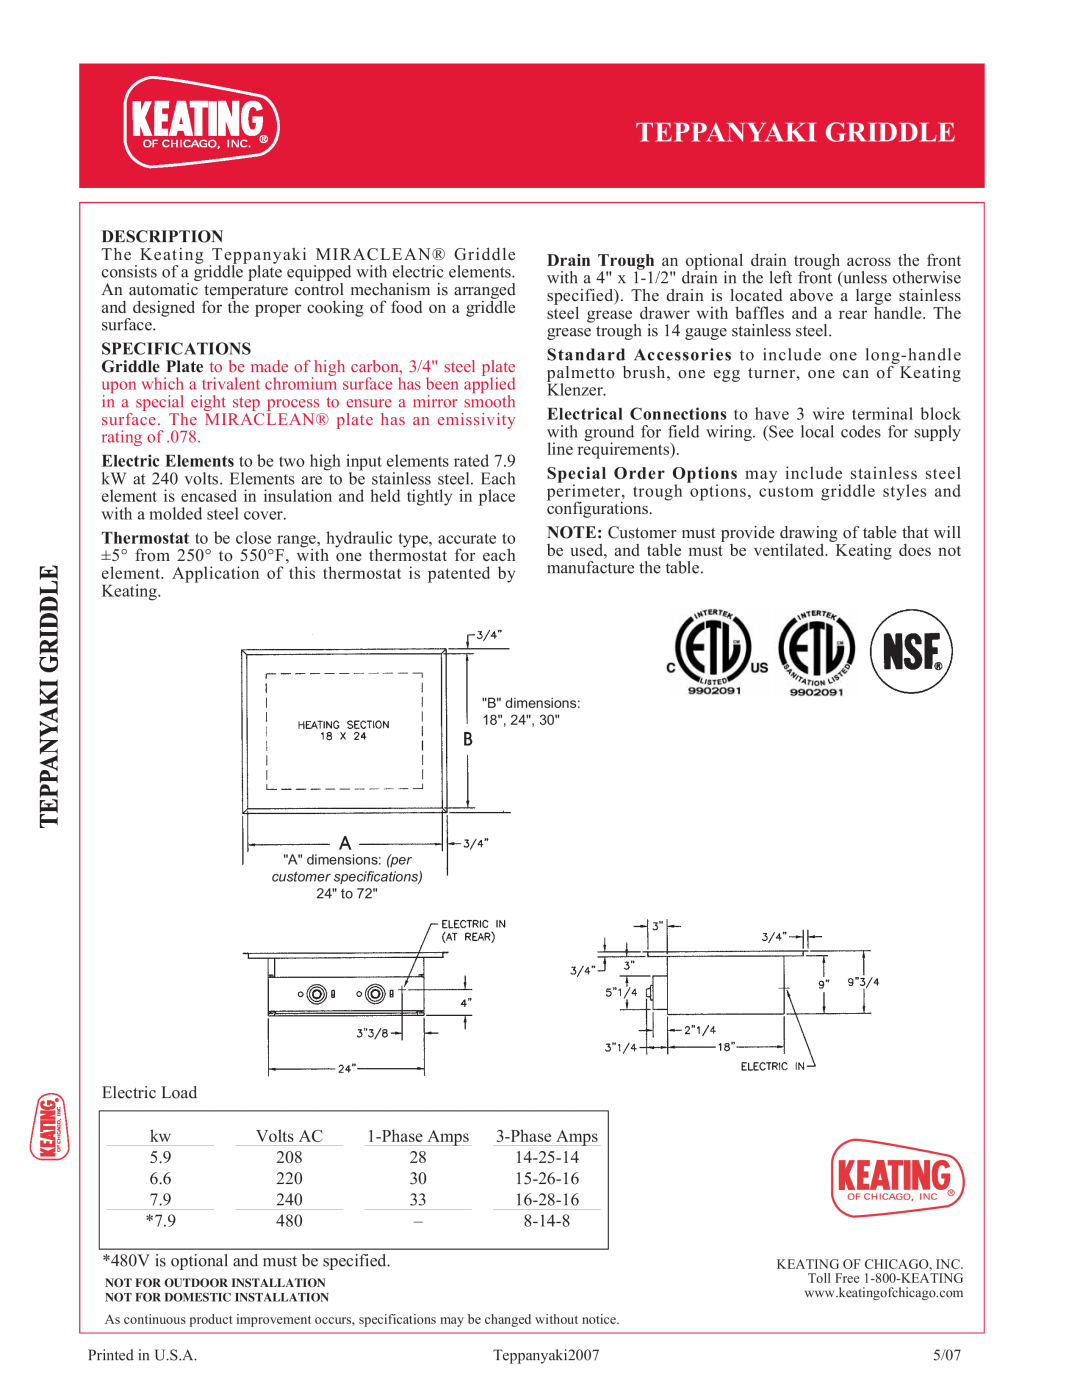 Keating Of Chicago Teppanyaki Griddle specifications Description, Specifications 